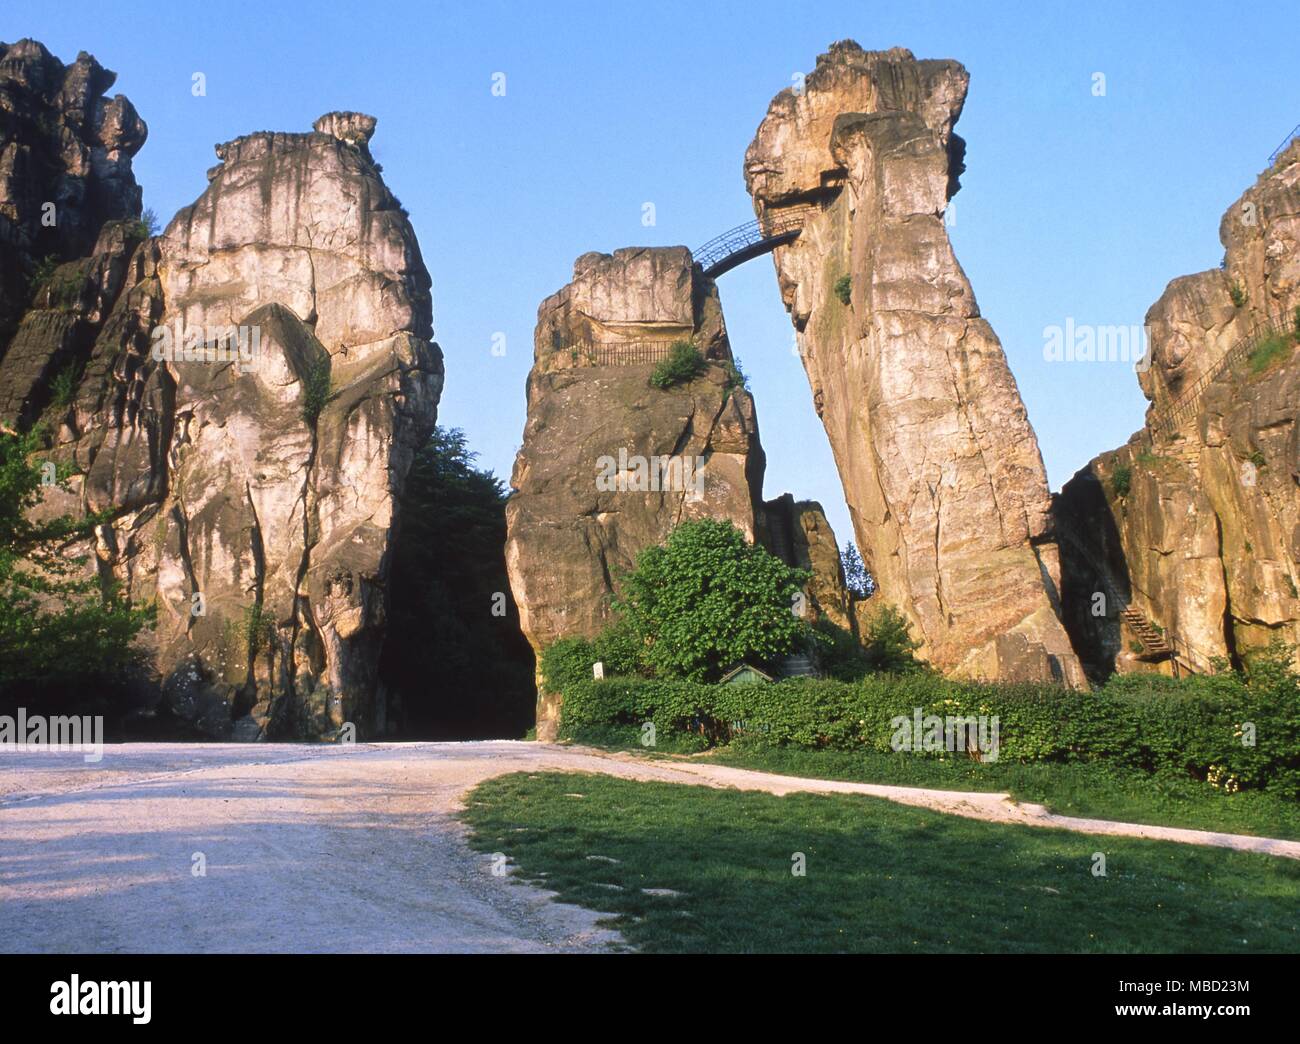 Externsteine rocks, Detmold, Germany. The relief image of a large headed hanging man on the left hand rock is said to represent Odin hanging Stock Photo